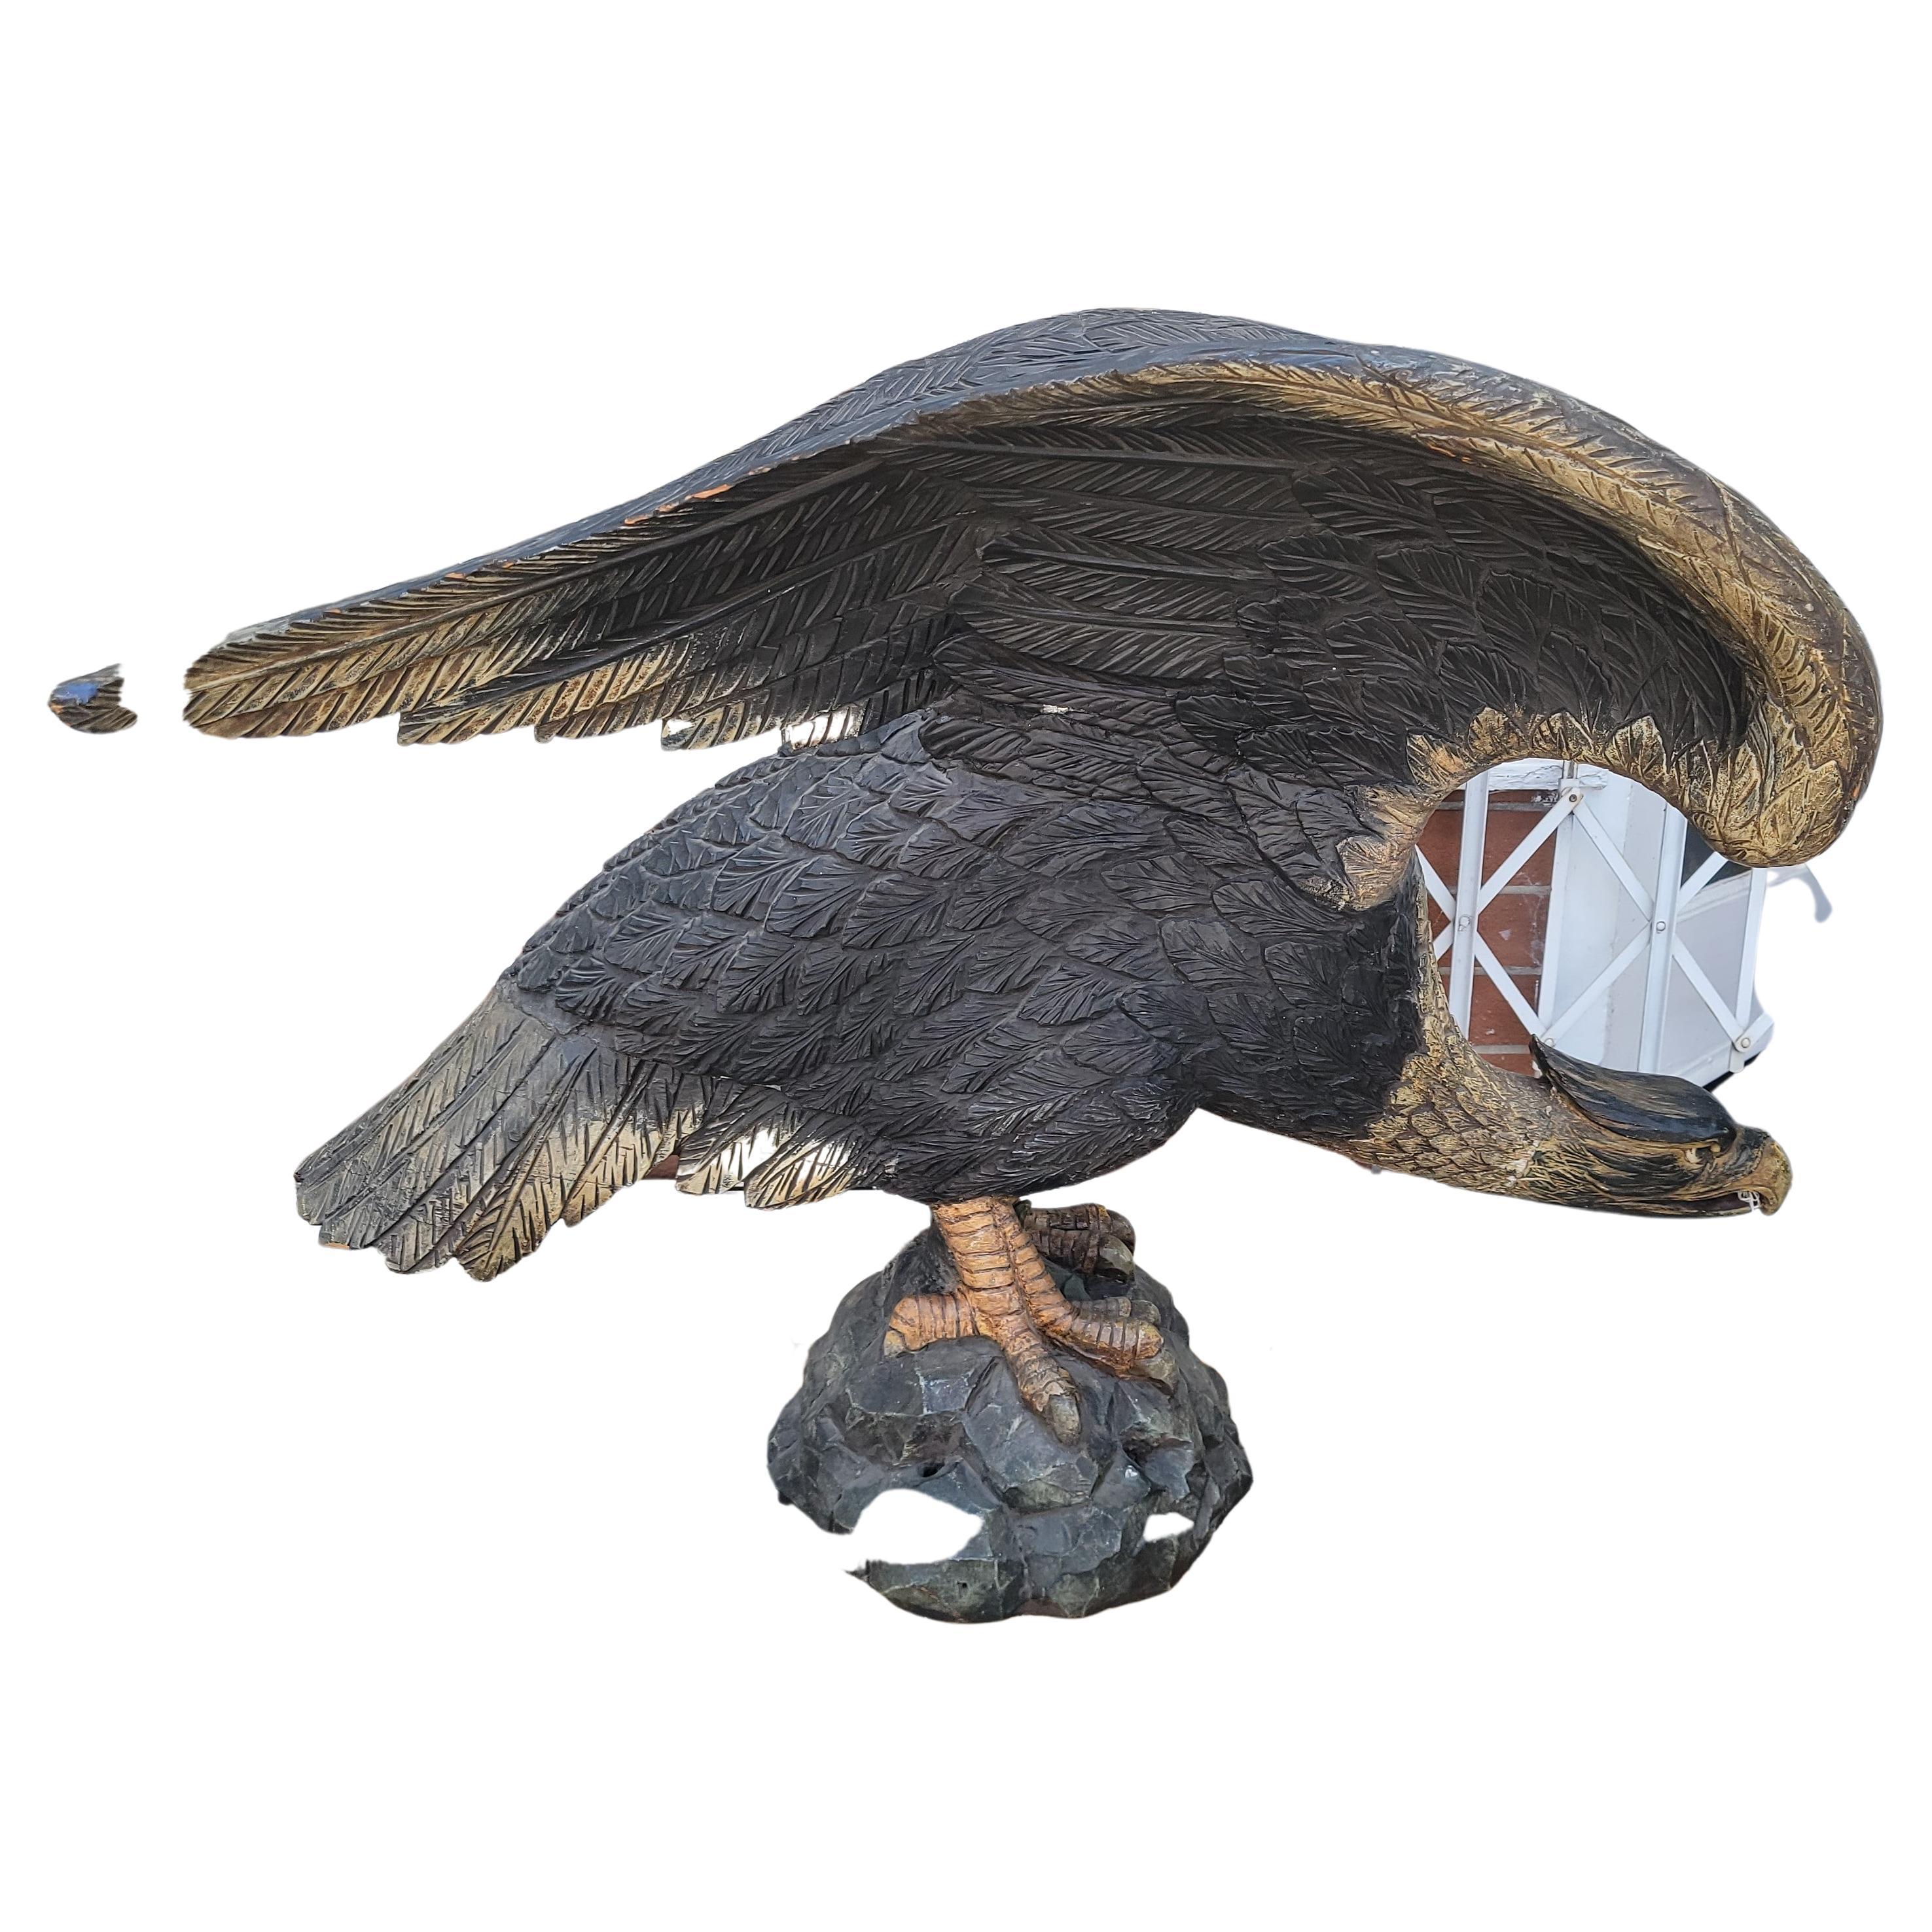 19th C Monumental Hand Carved & Painted Eagle Sculpture.  It is possibly from a Federal or government building. It's a Architectural Folk Art Element. The Eagle is carved of wood and has amazing Patina. This sculpture came from a 40 year Folk